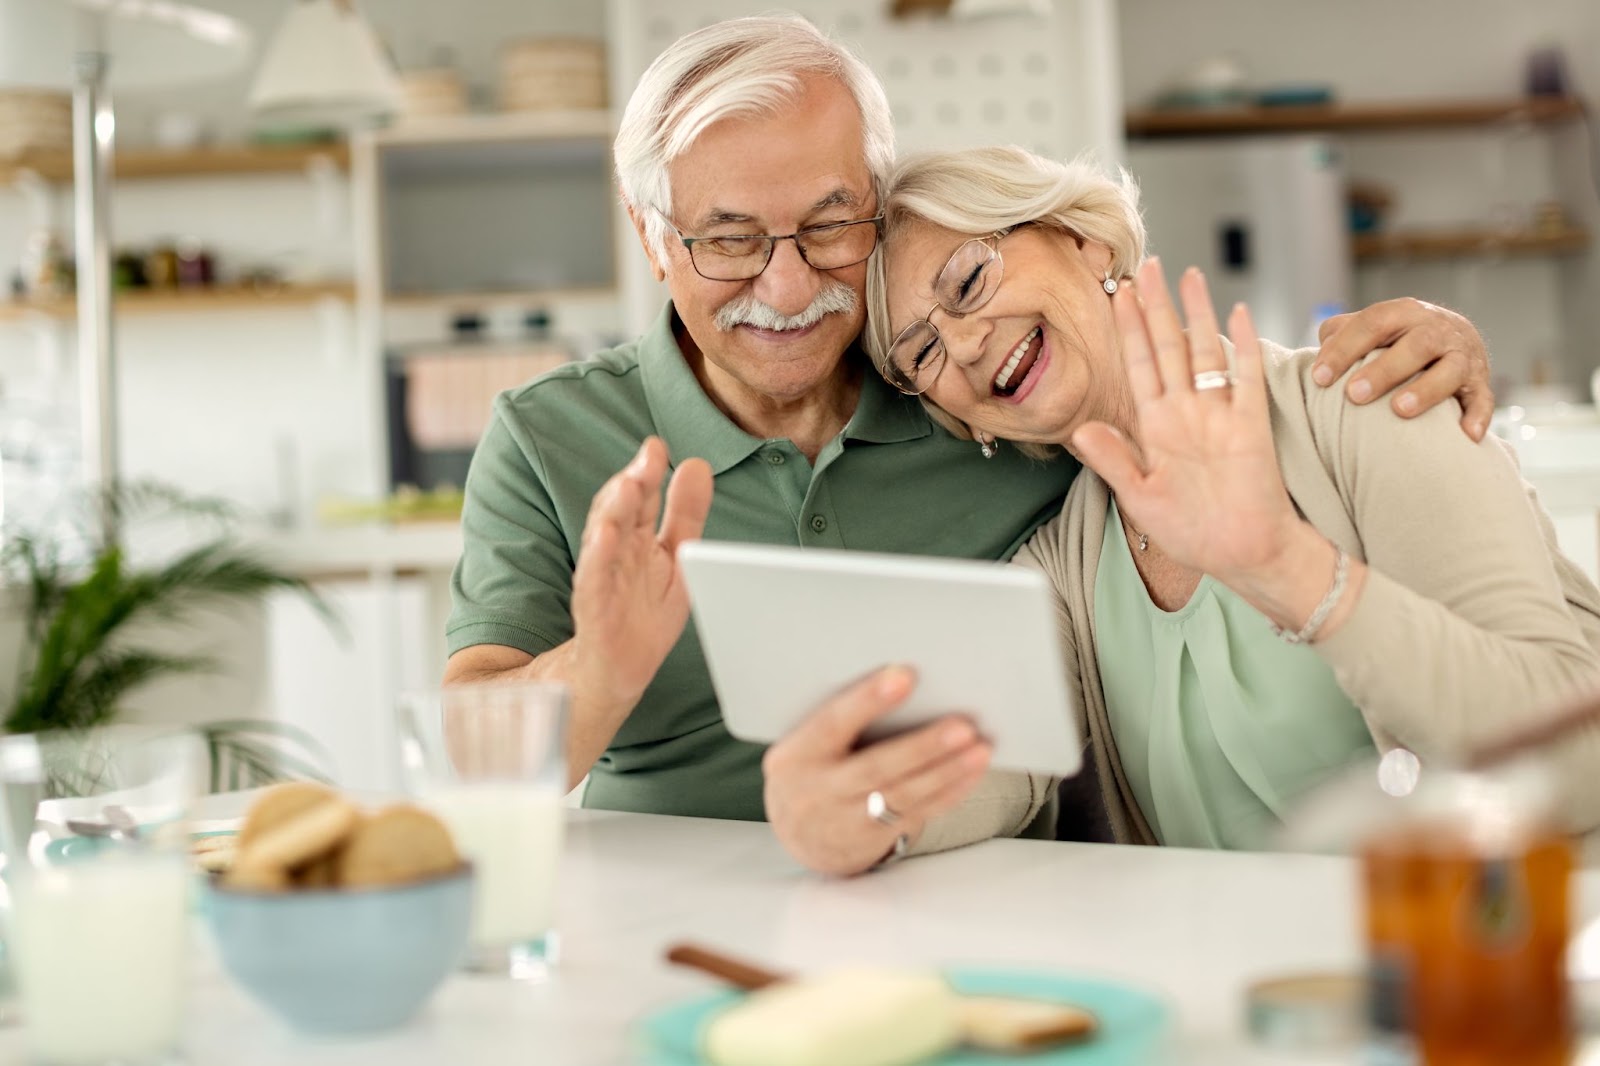 An elderly couple smile and wave at someone during a video call on a tablet.